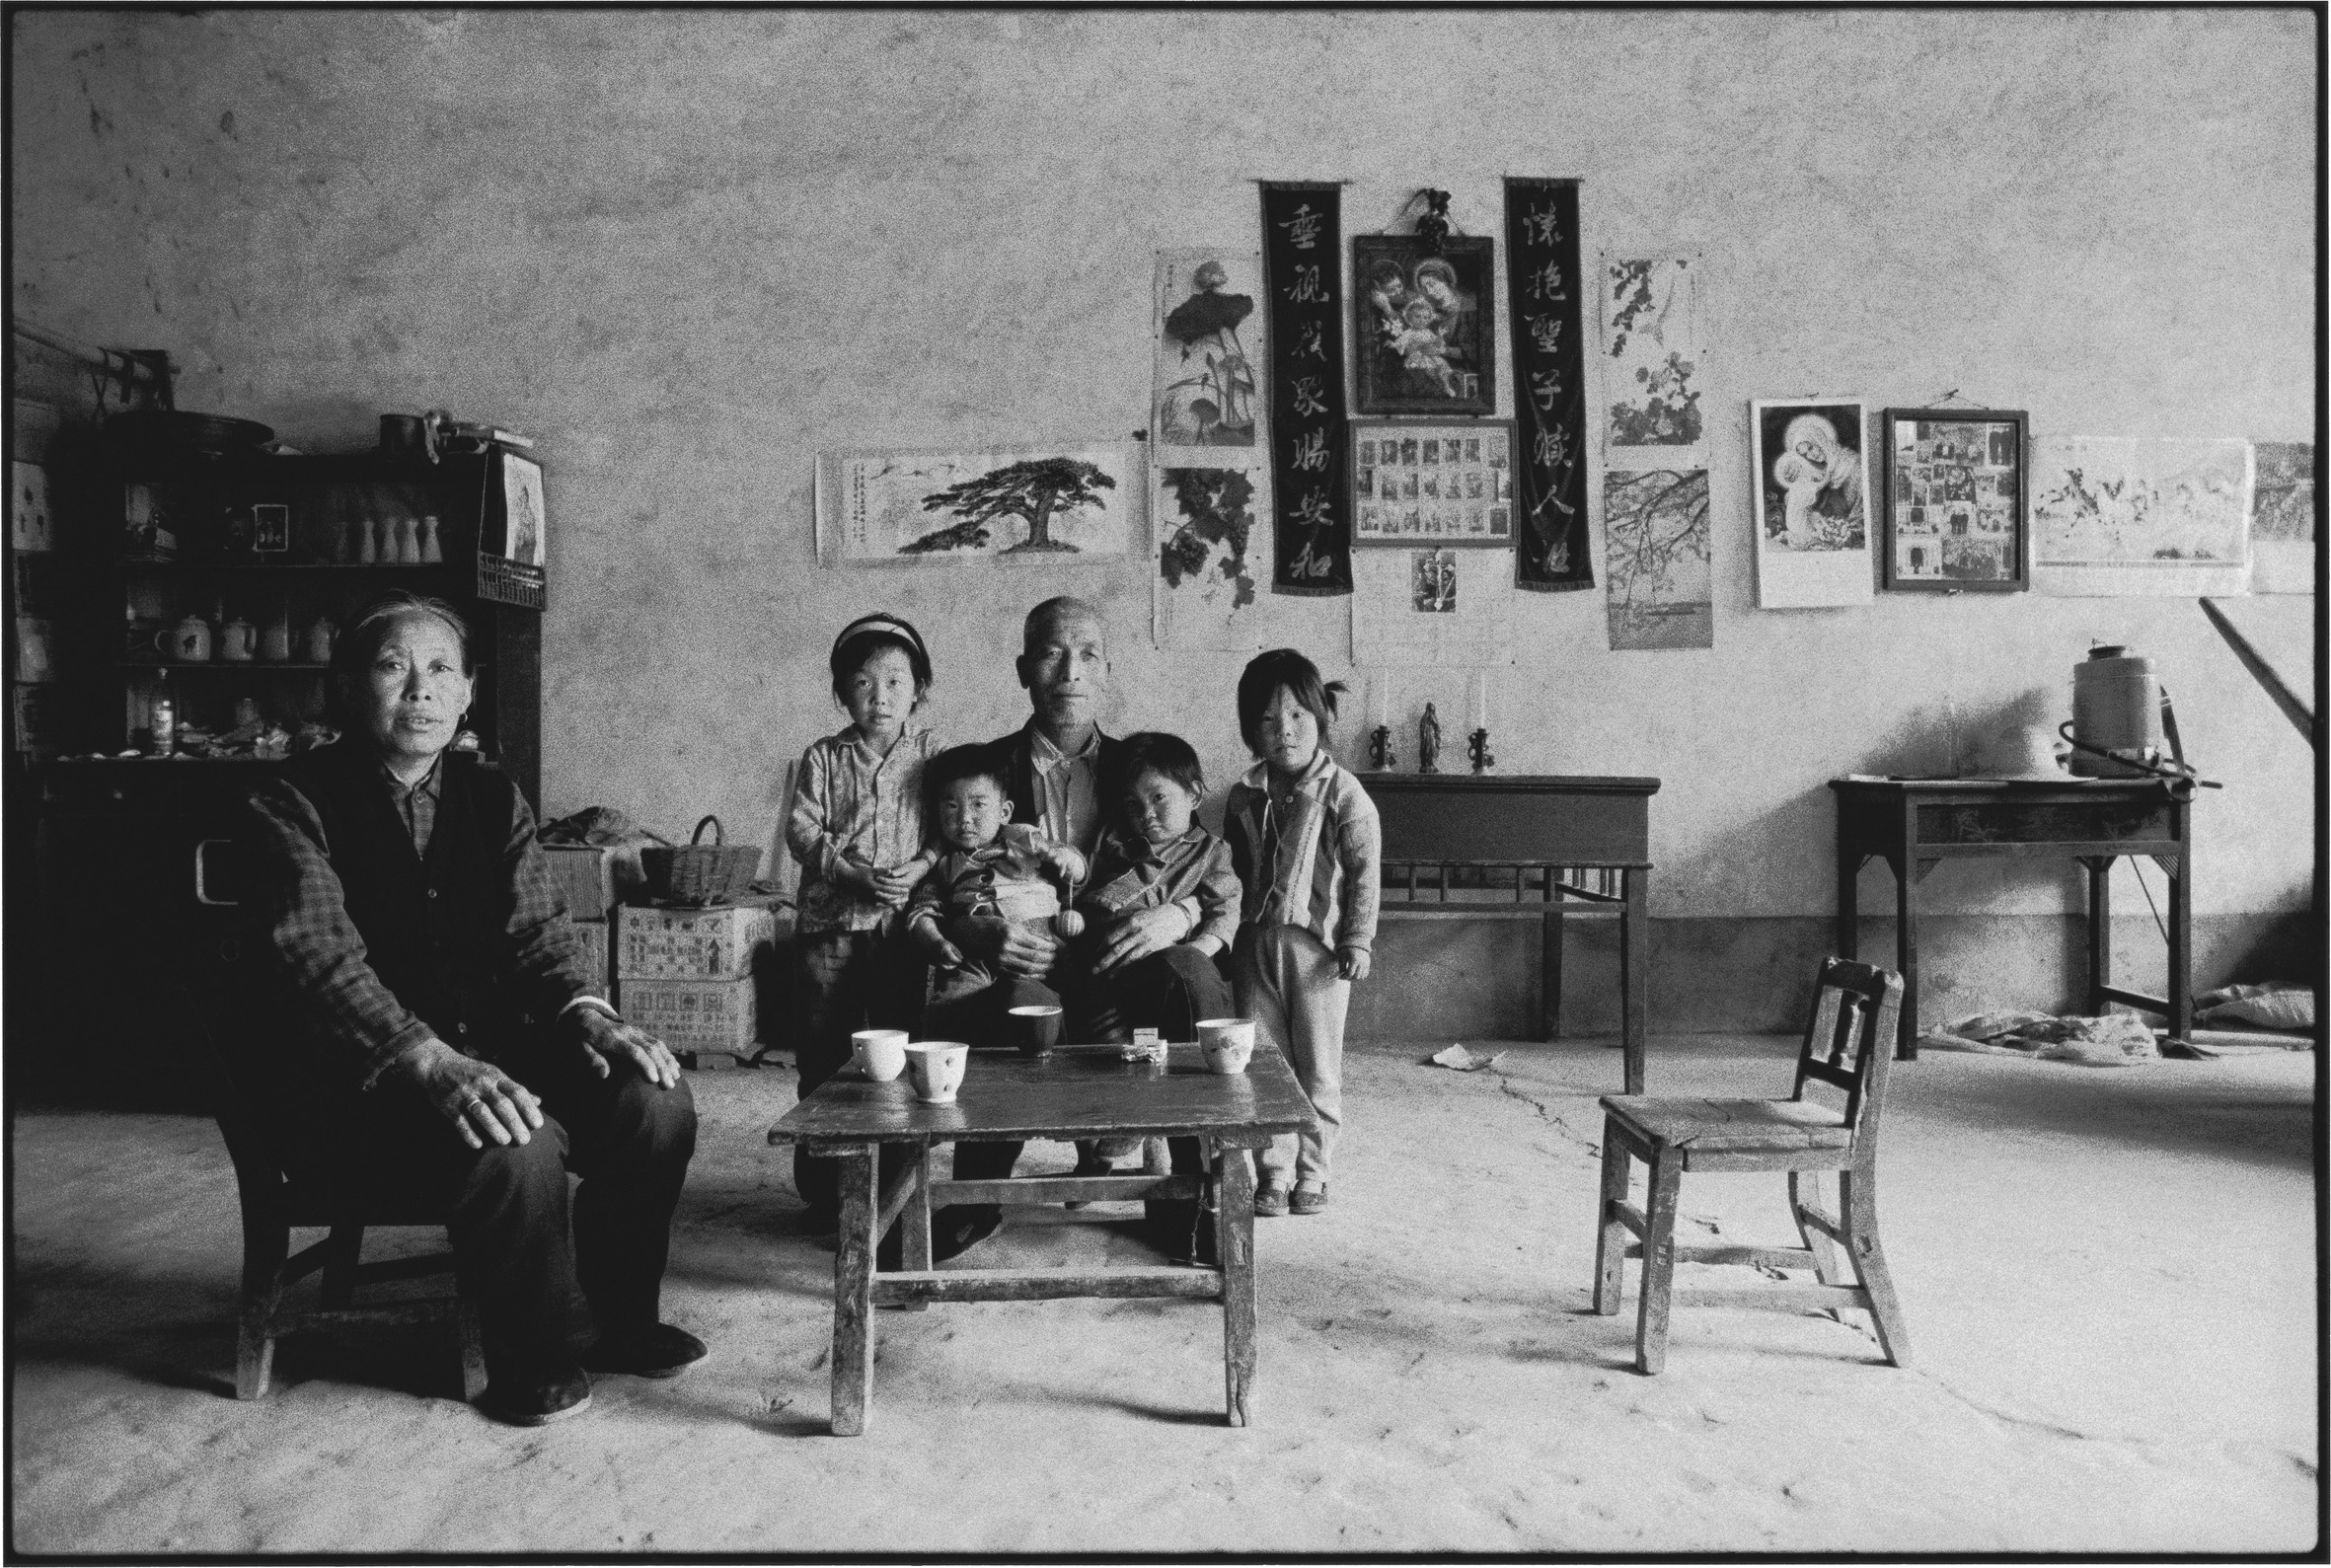 A Grandfather, Grandmother, and Their Grandchildren, Shaanxi, China